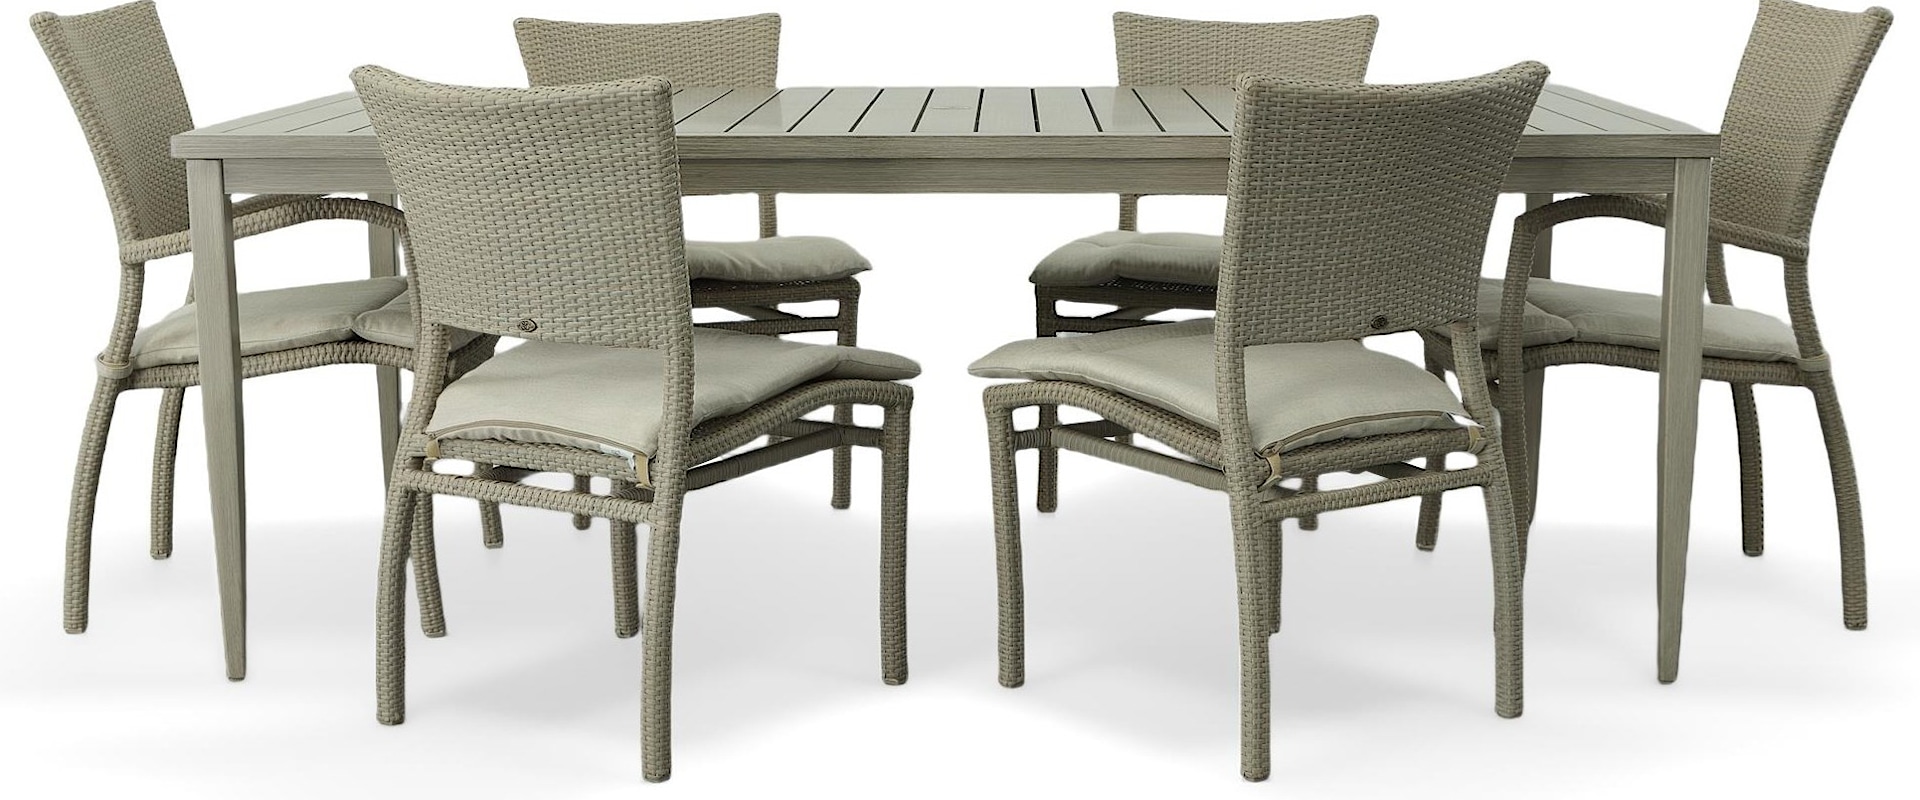 Wrought Aluminum Table with 4 Side Chairs and 2 Arm Chairs